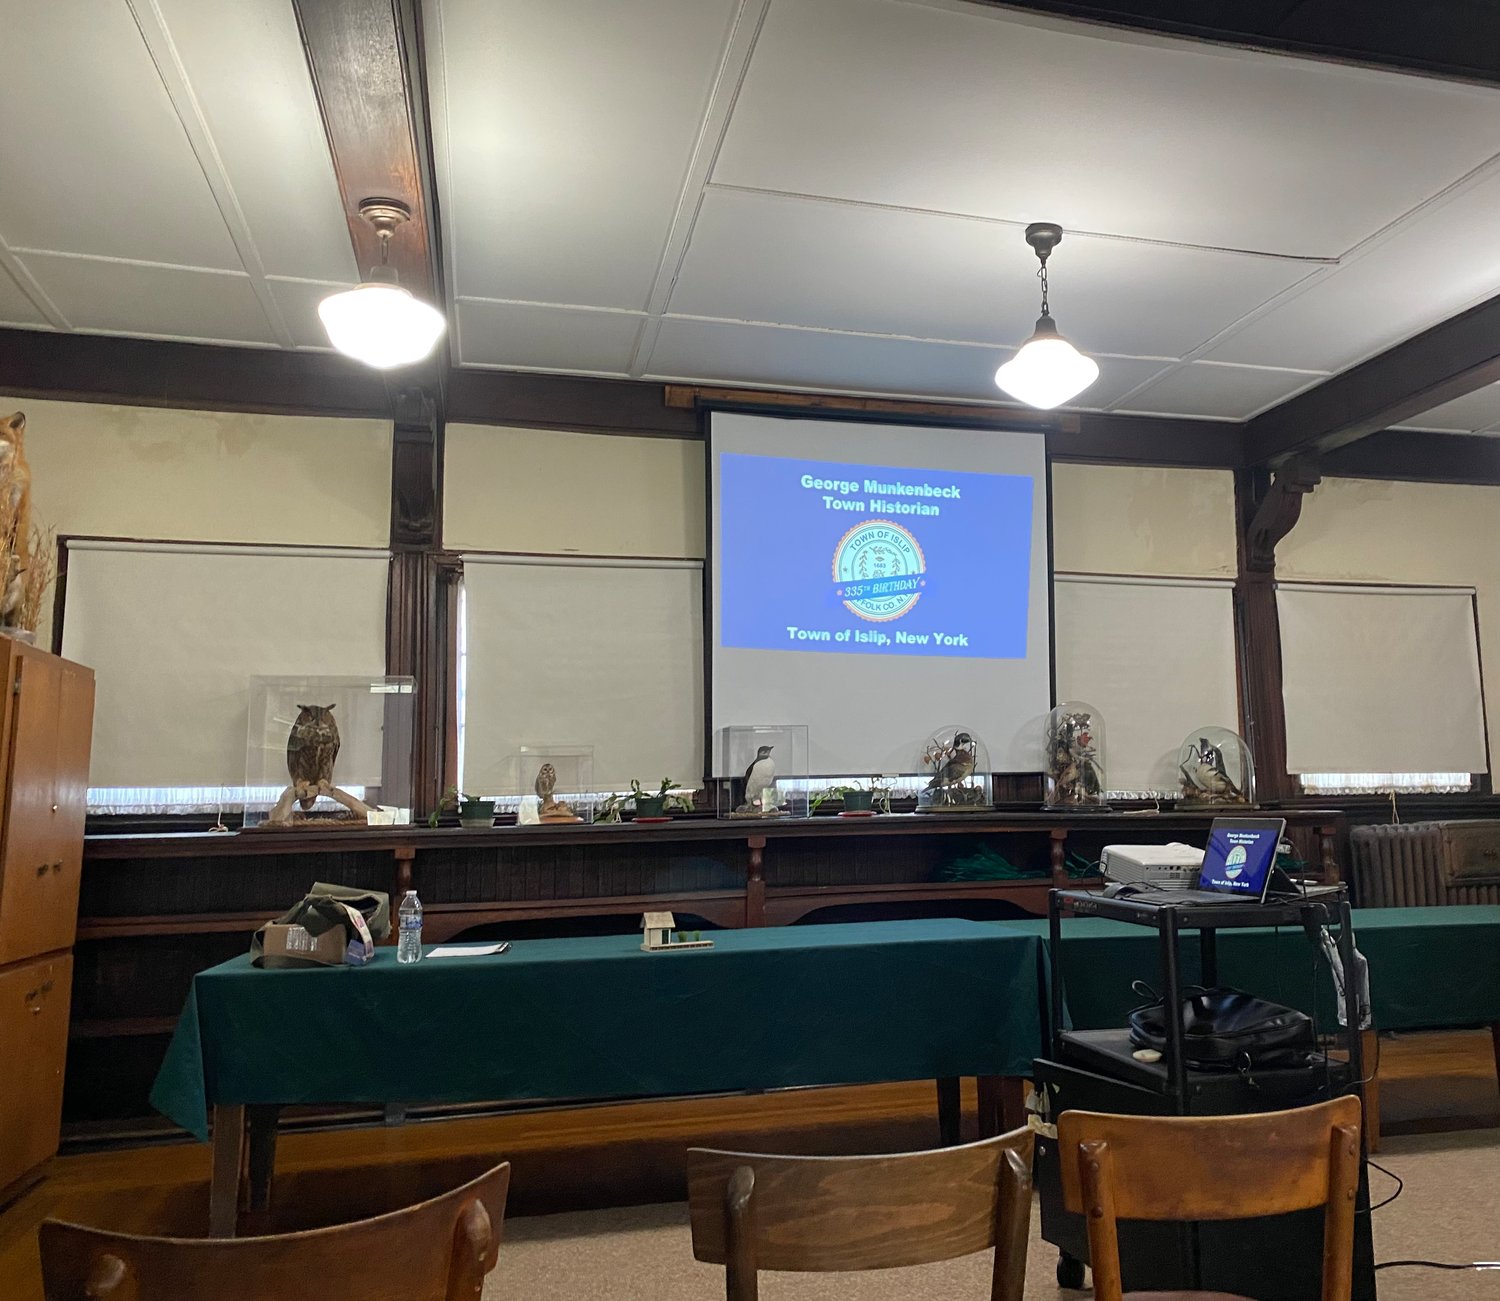 Reporter Mariana Dominguez attended a lecture from Islip Town historian George Munkenbeck.